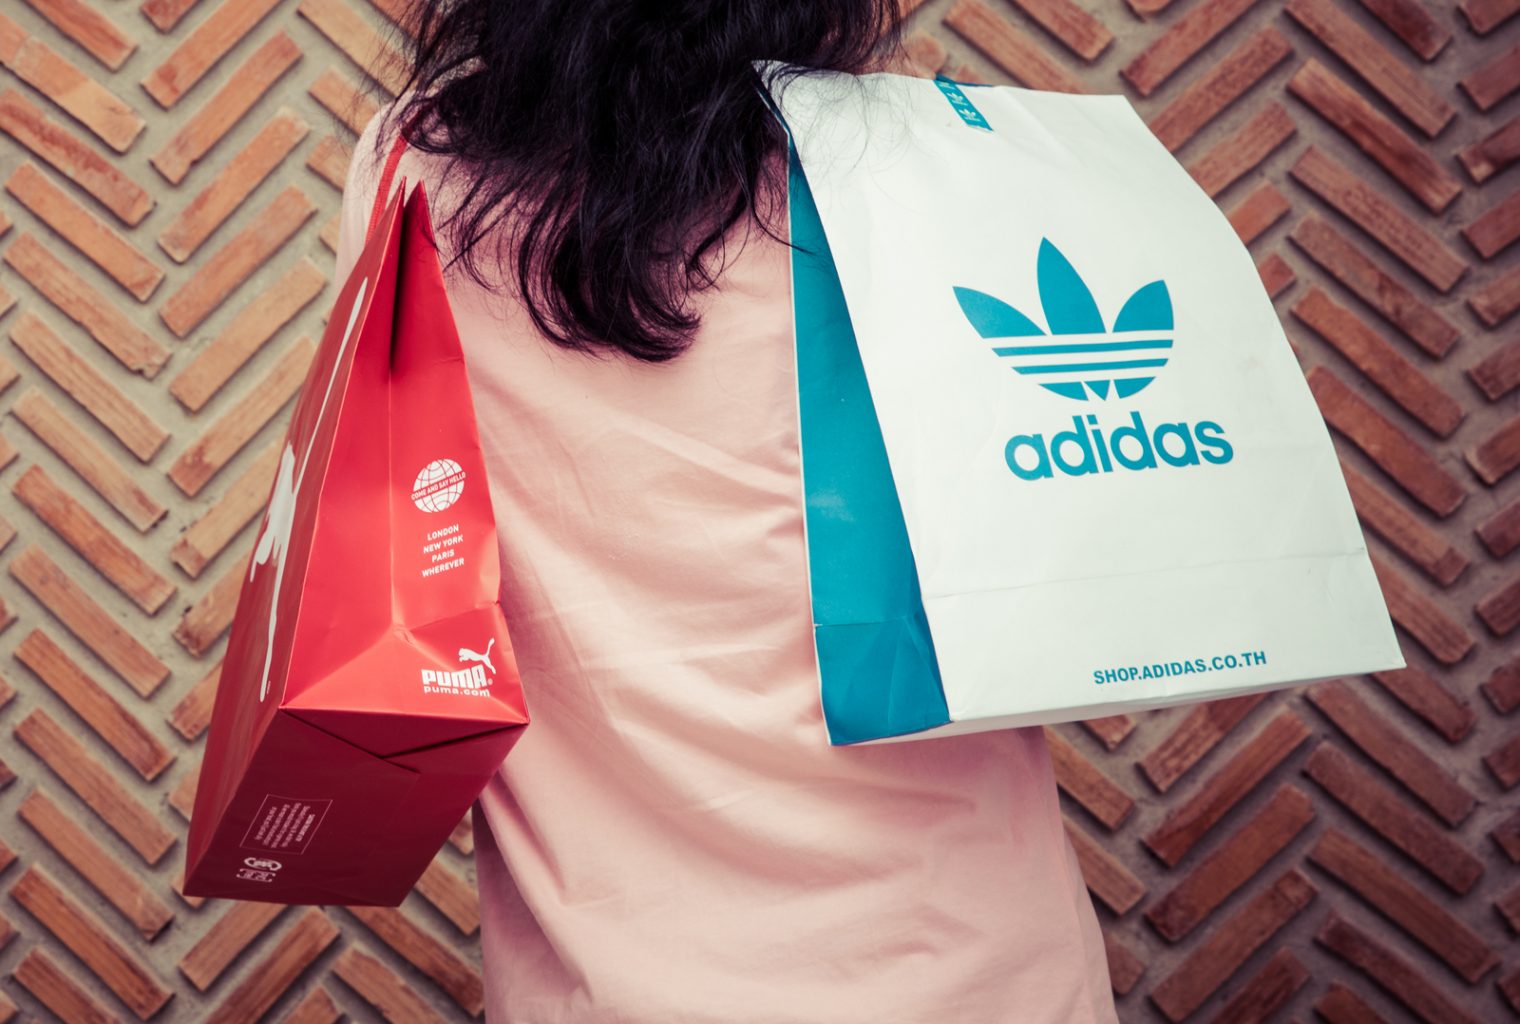 How To Buy Gift Cards For Nike Adidas And Other Top Brands With - 